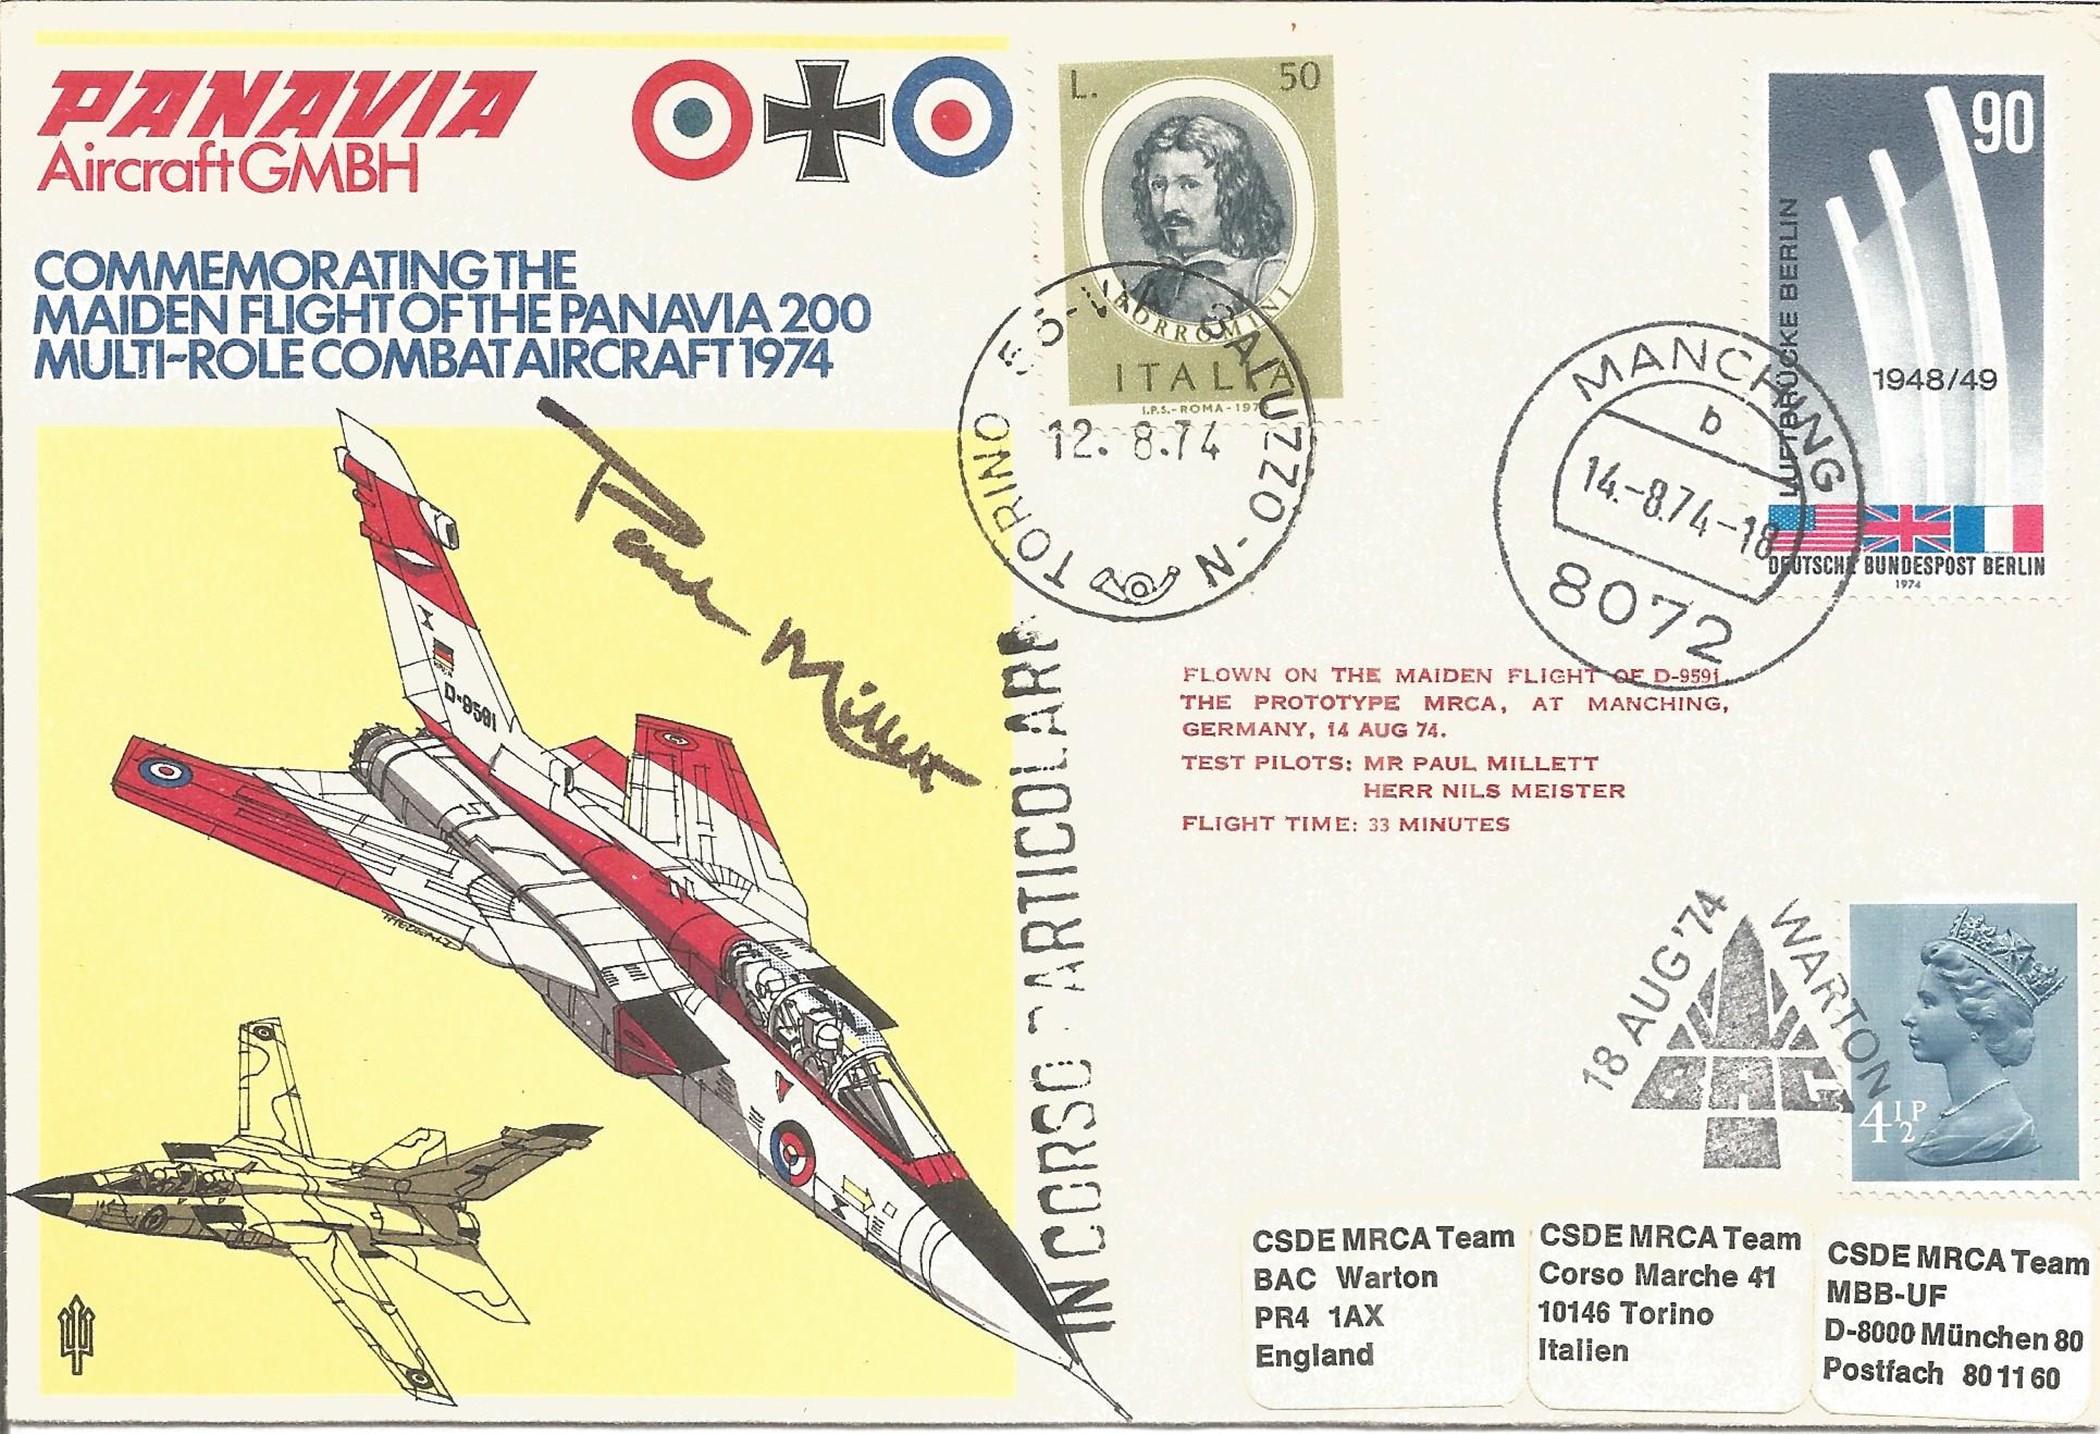 Paul Millett signed FDC Panavia Aircraft GMBH Commemorating the Maiden Flight of the Panavia 200